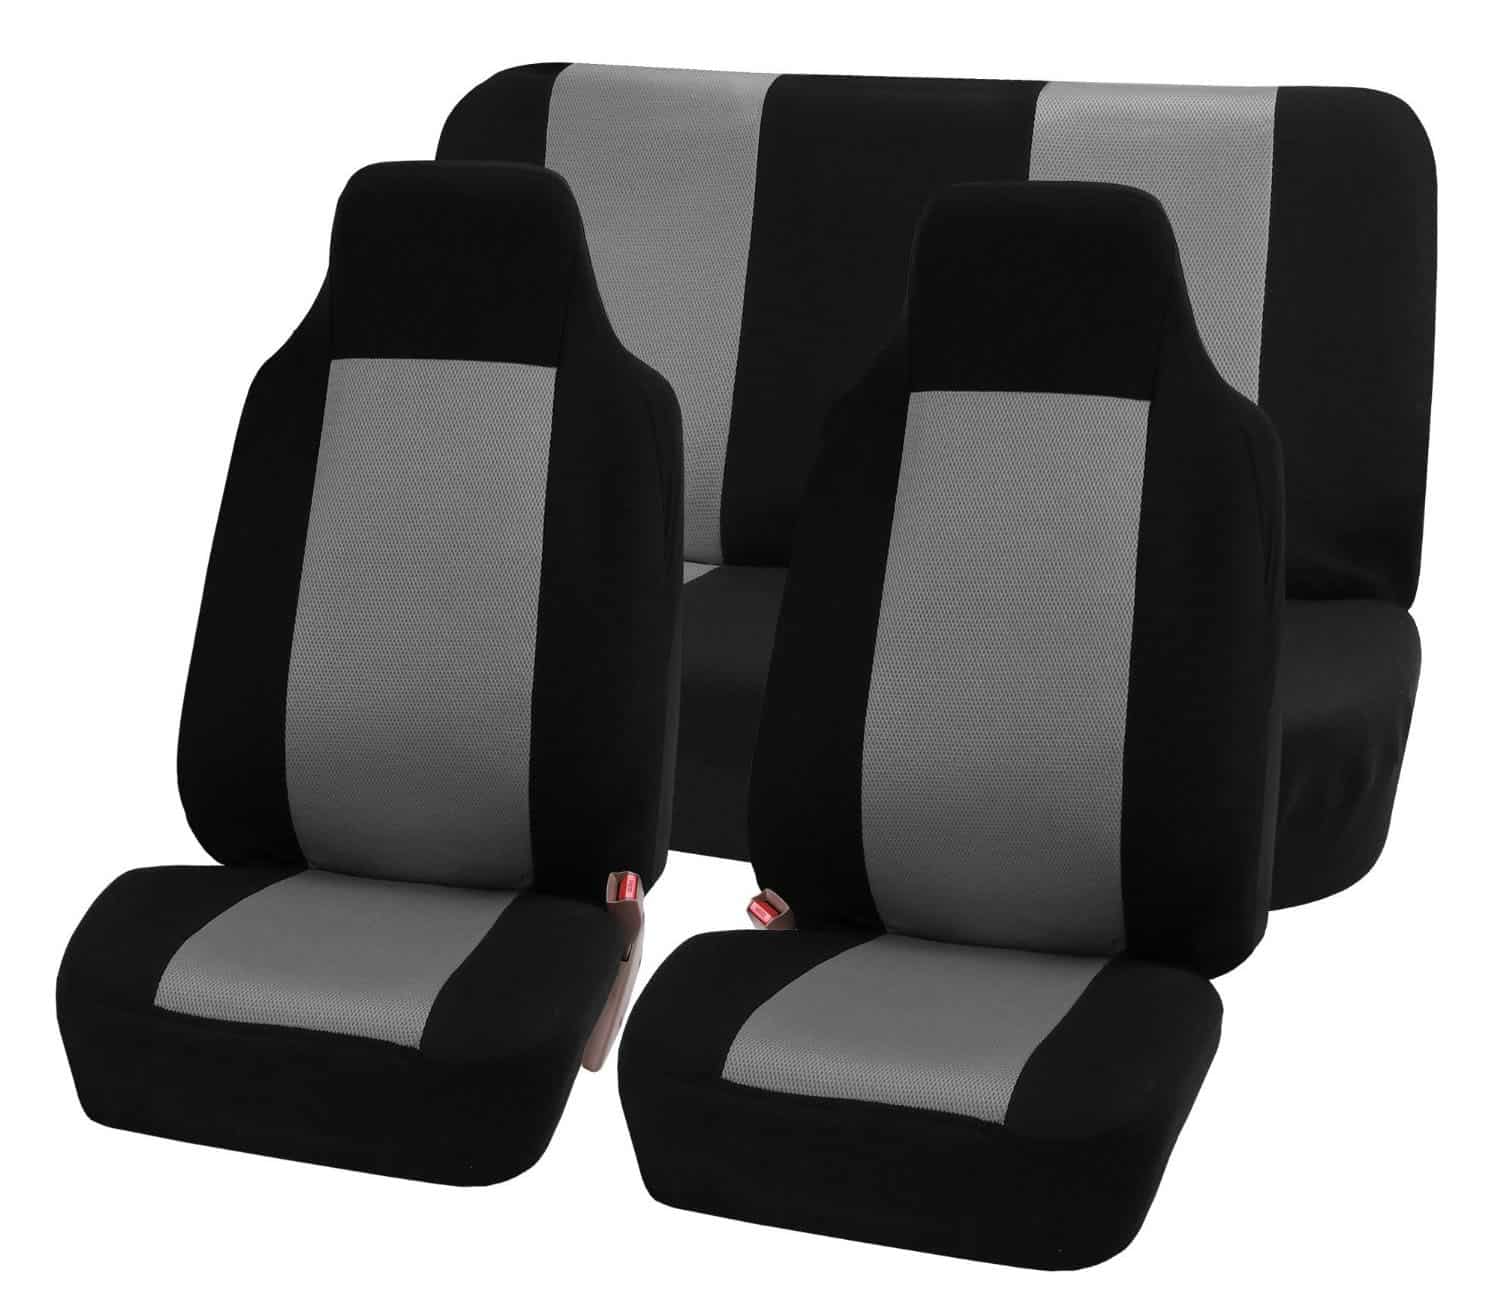 Top 10 Best Car Seat Covers in 2017